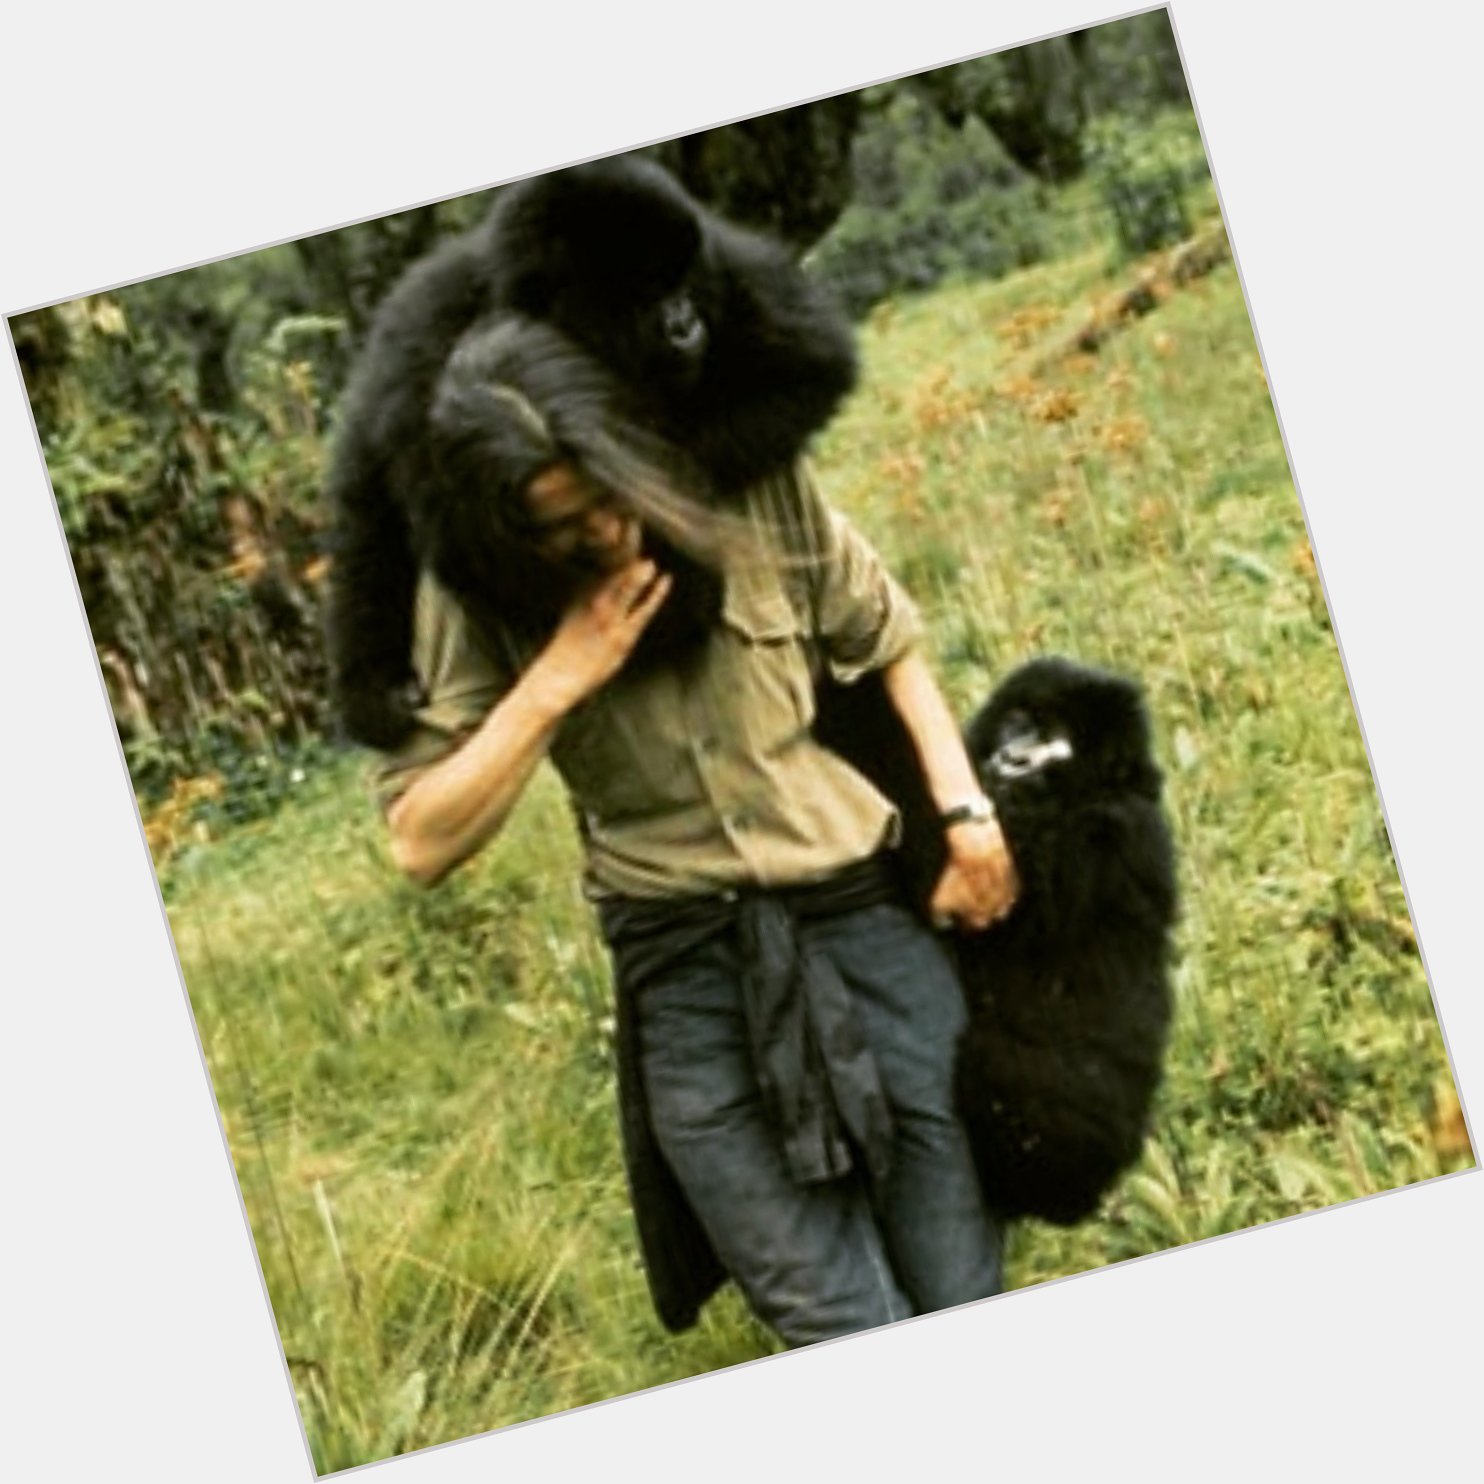 Happy Bday to Dian Fossey. An inspirational woman, who worked tirelessly to research & protect Mountain Gorillas. 